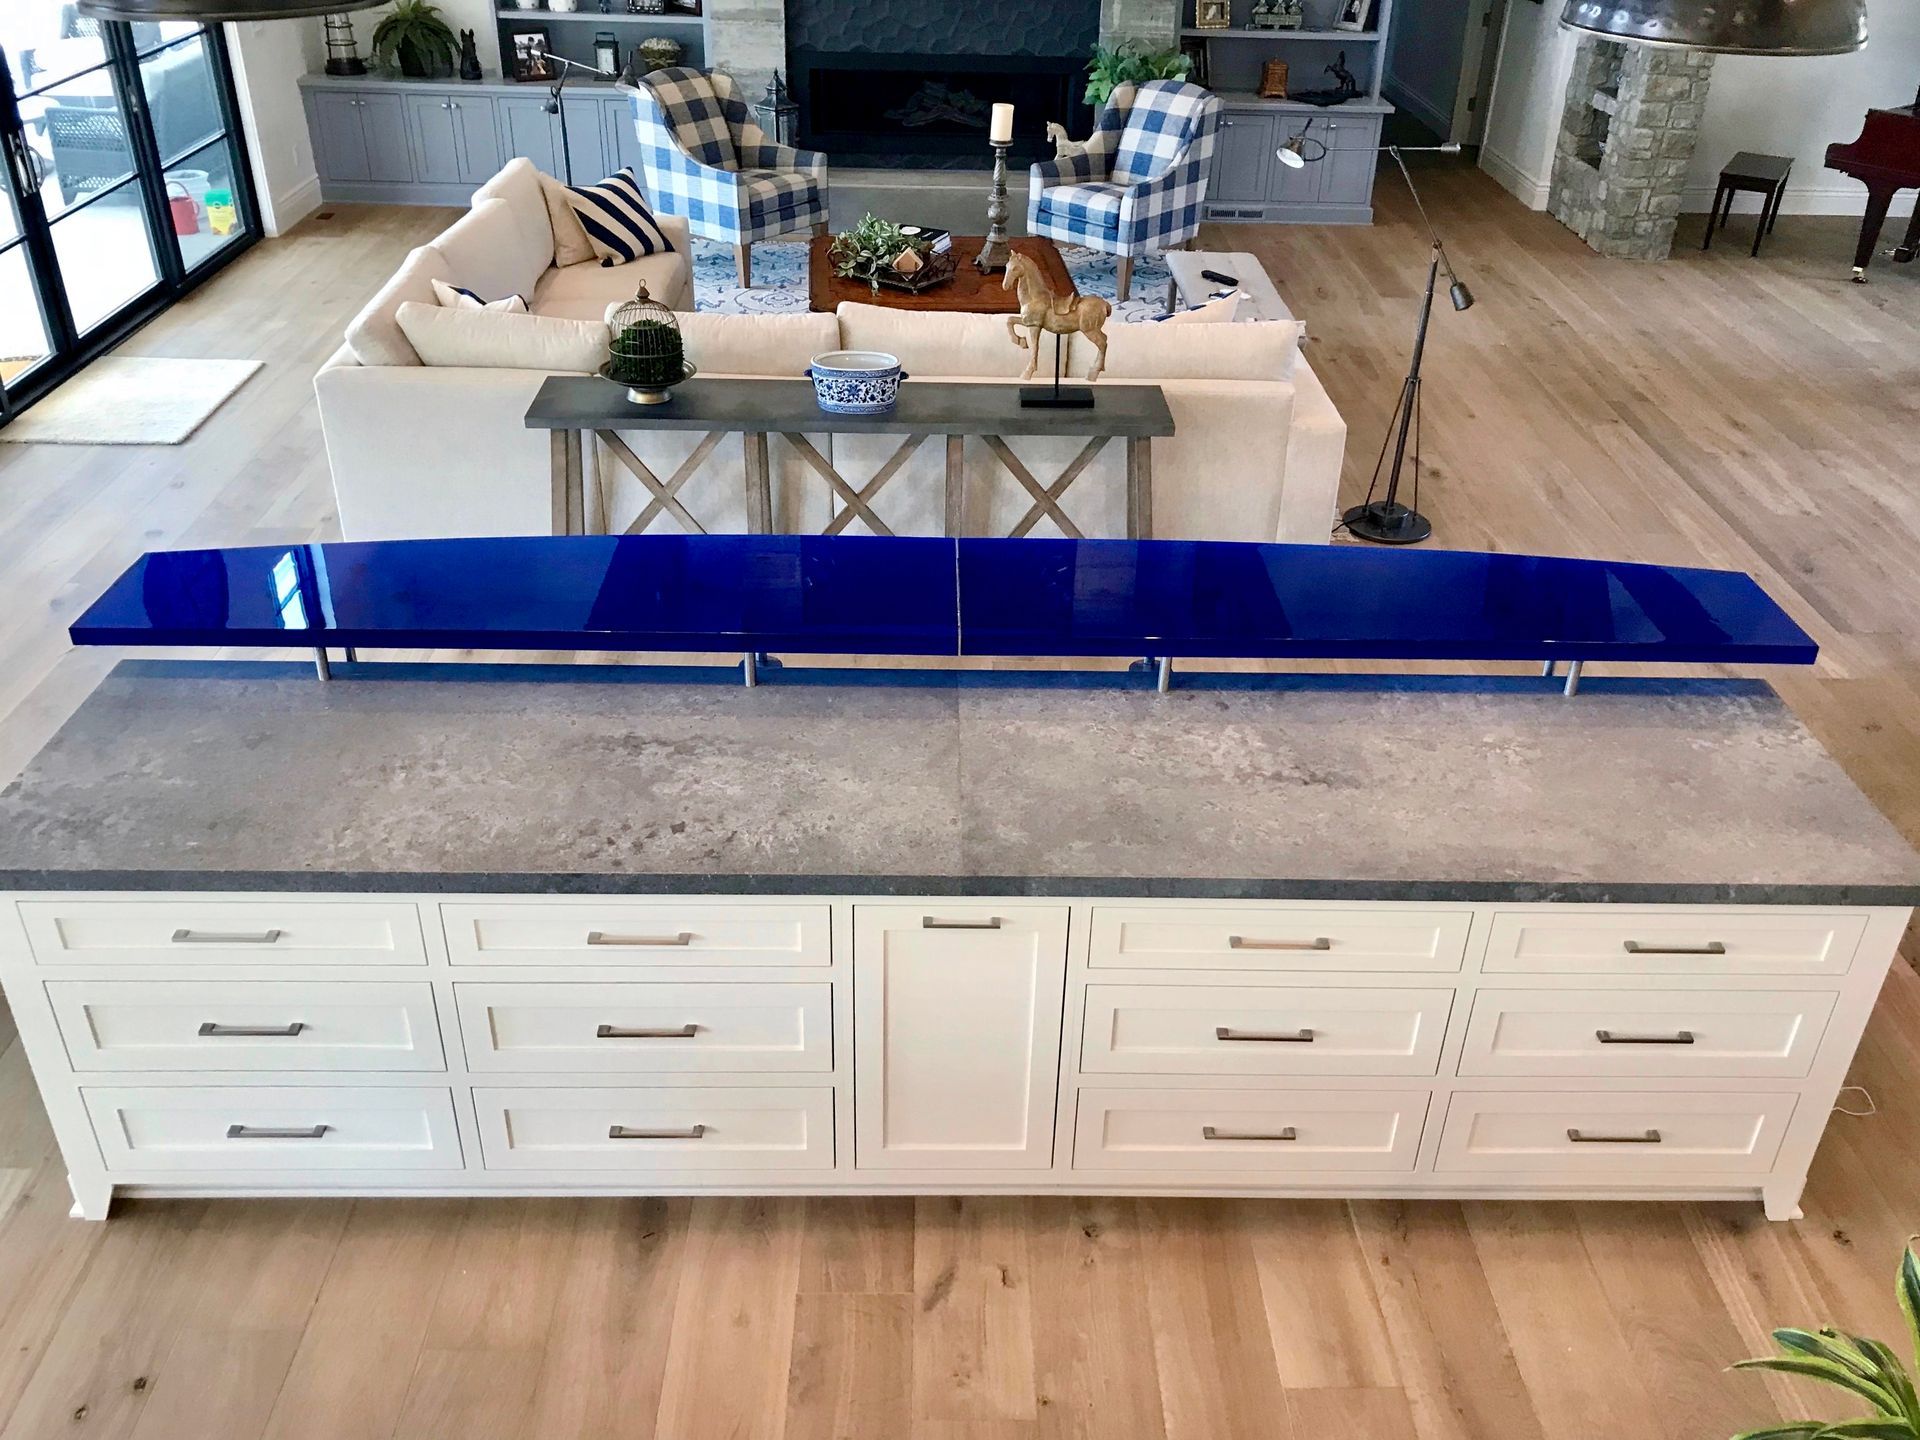 A raised blue glass countertop.